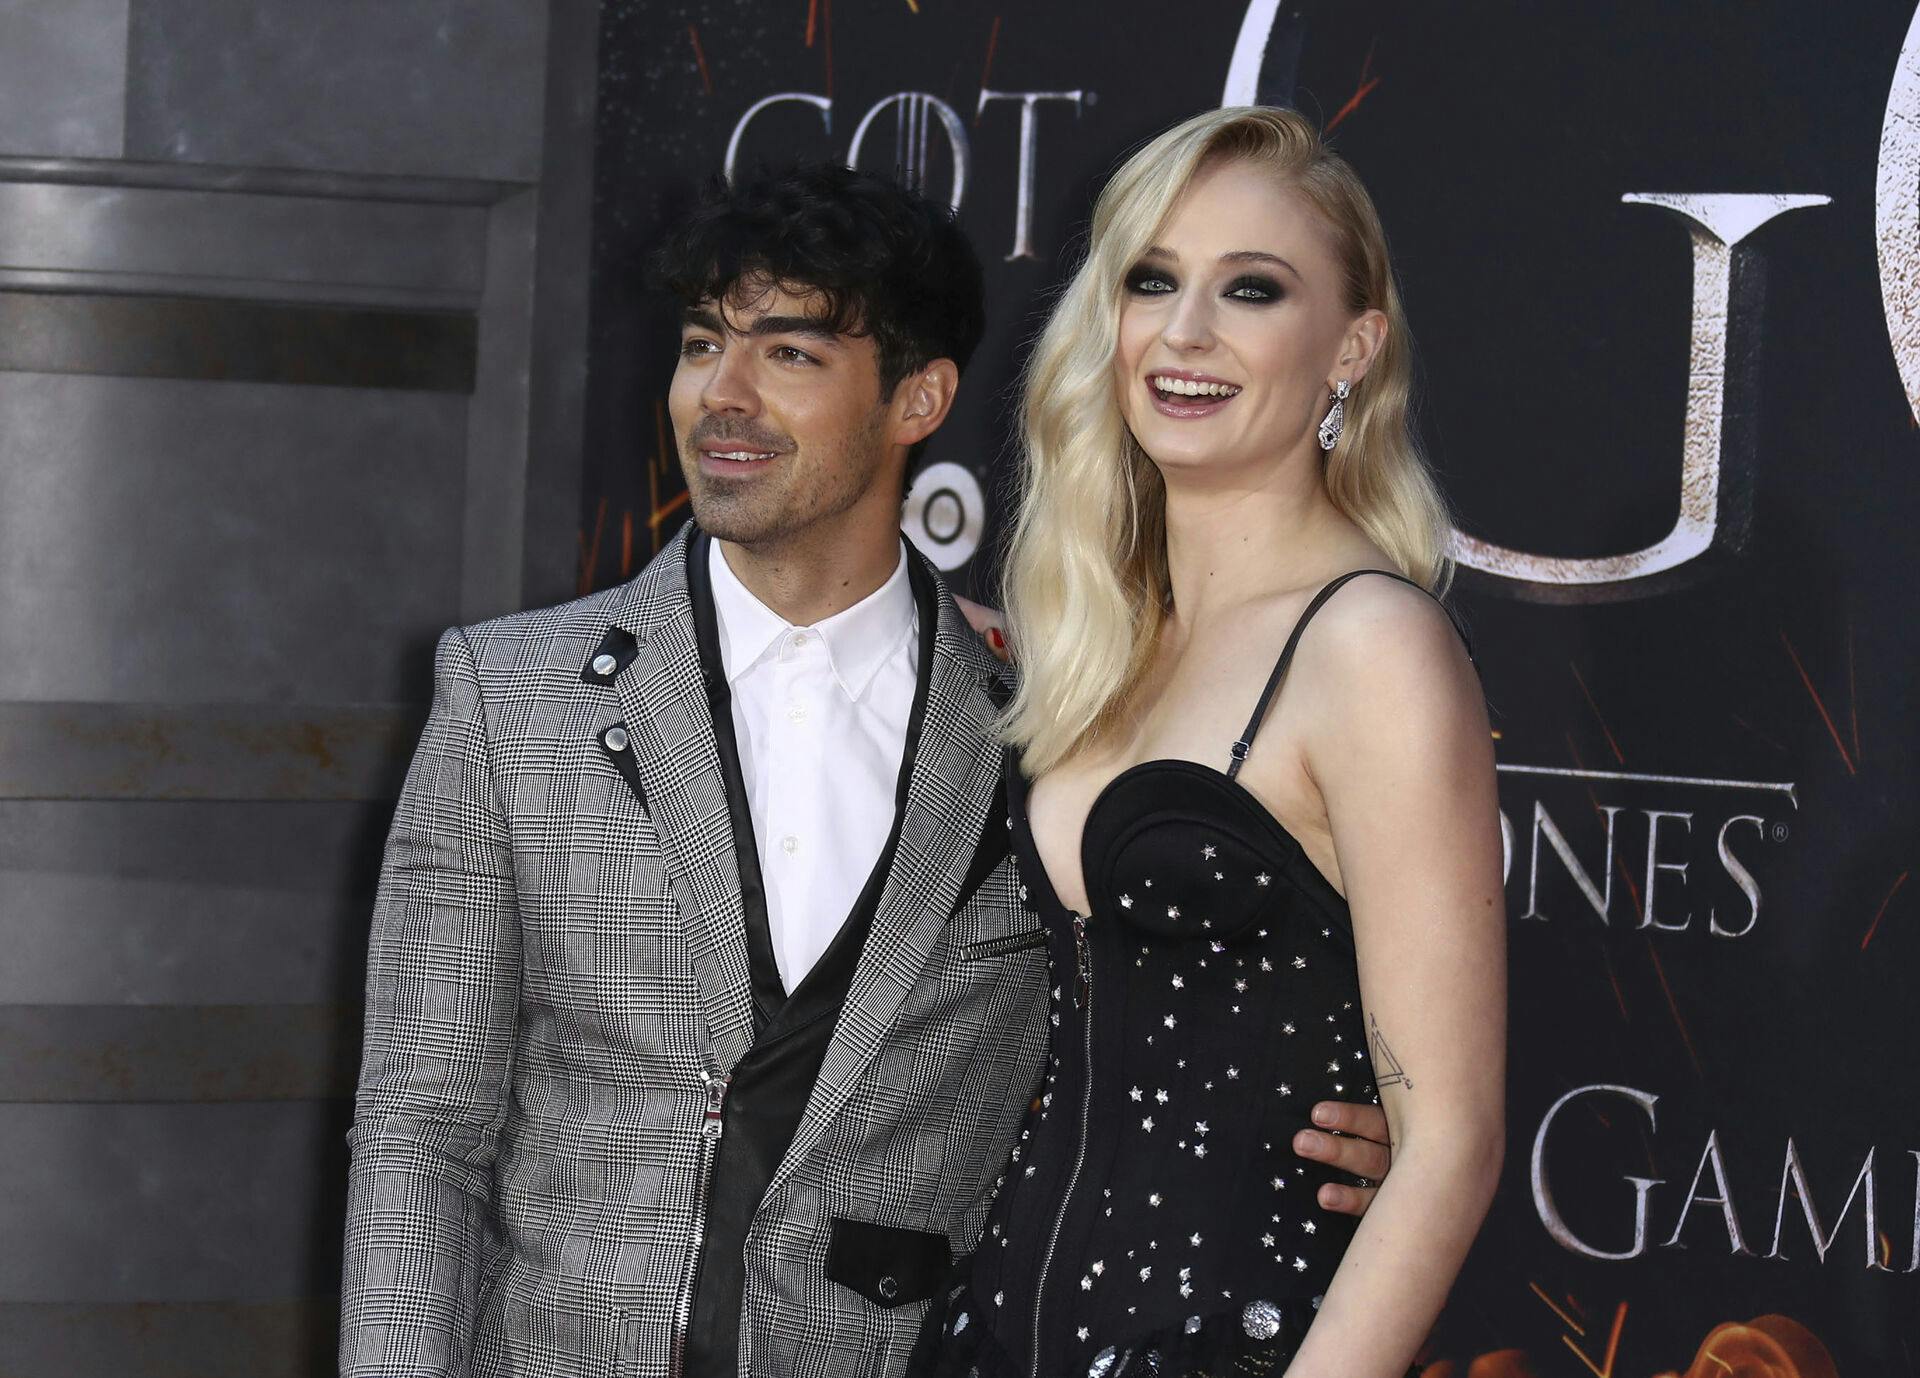 February 13th 2020 - Joe Jonas and Sophie Turner are expecting their first child. - File Photo by: zz/John Nacion/STAR MAX/IPx 2019 4/3/19 Joe Jonas and Sophie Turner at the season 8 premiere of "Game Of Thrones" in New York City. (NYC)